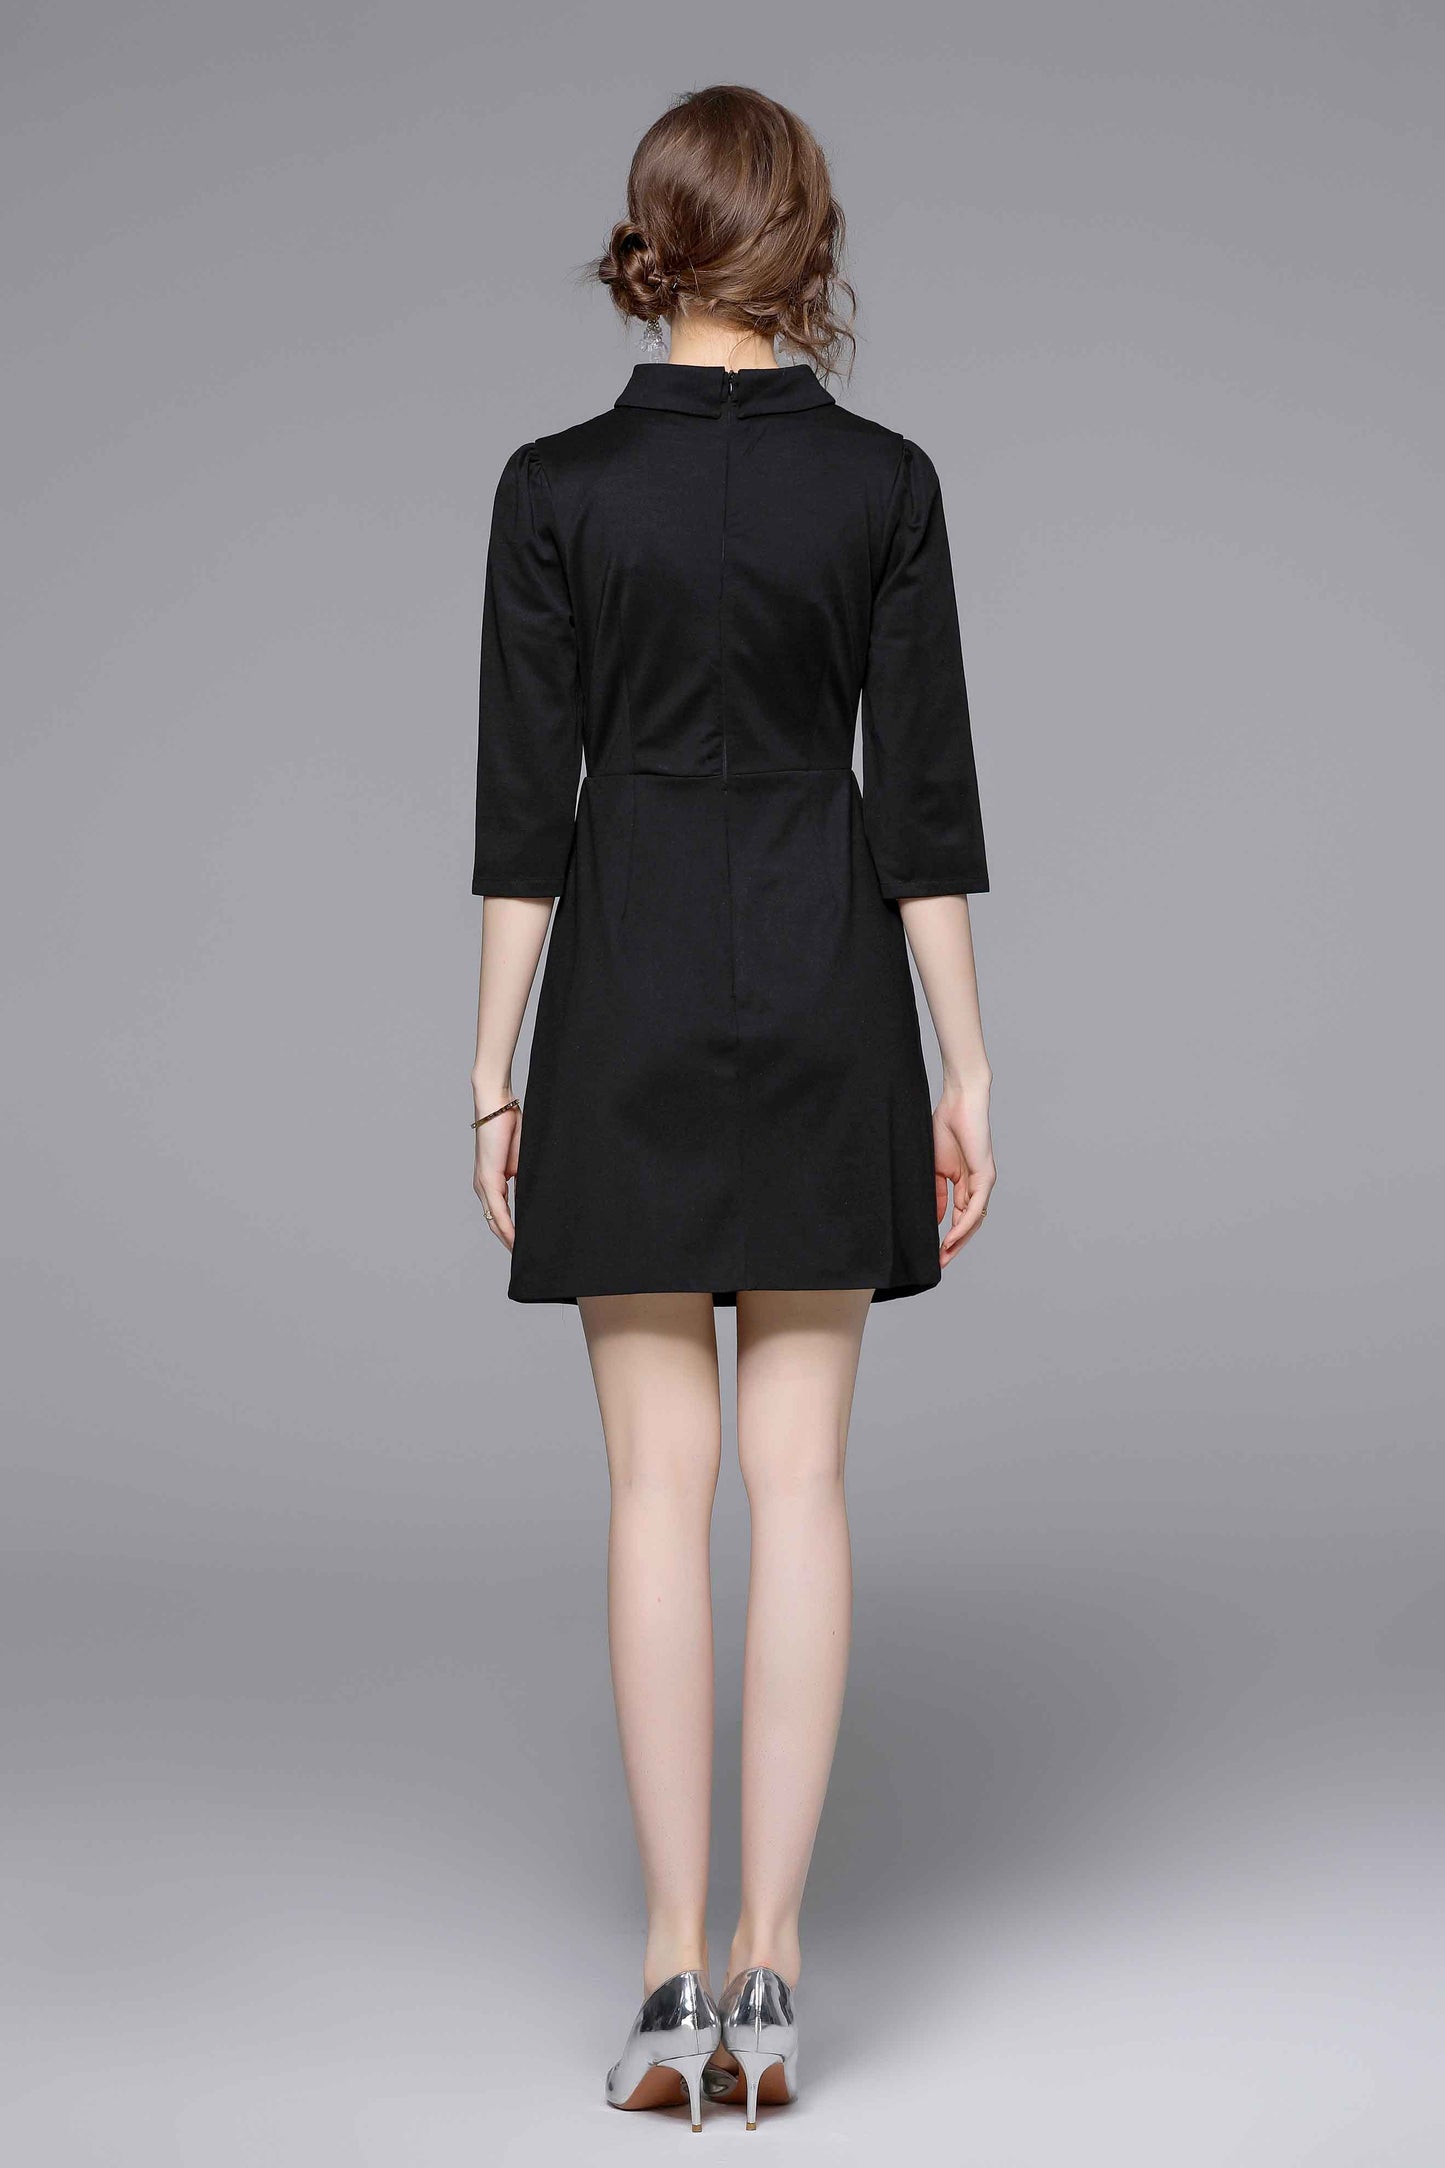 Black Collared Tie Neck 1/2 Sleeves Embroidery Mini Dress